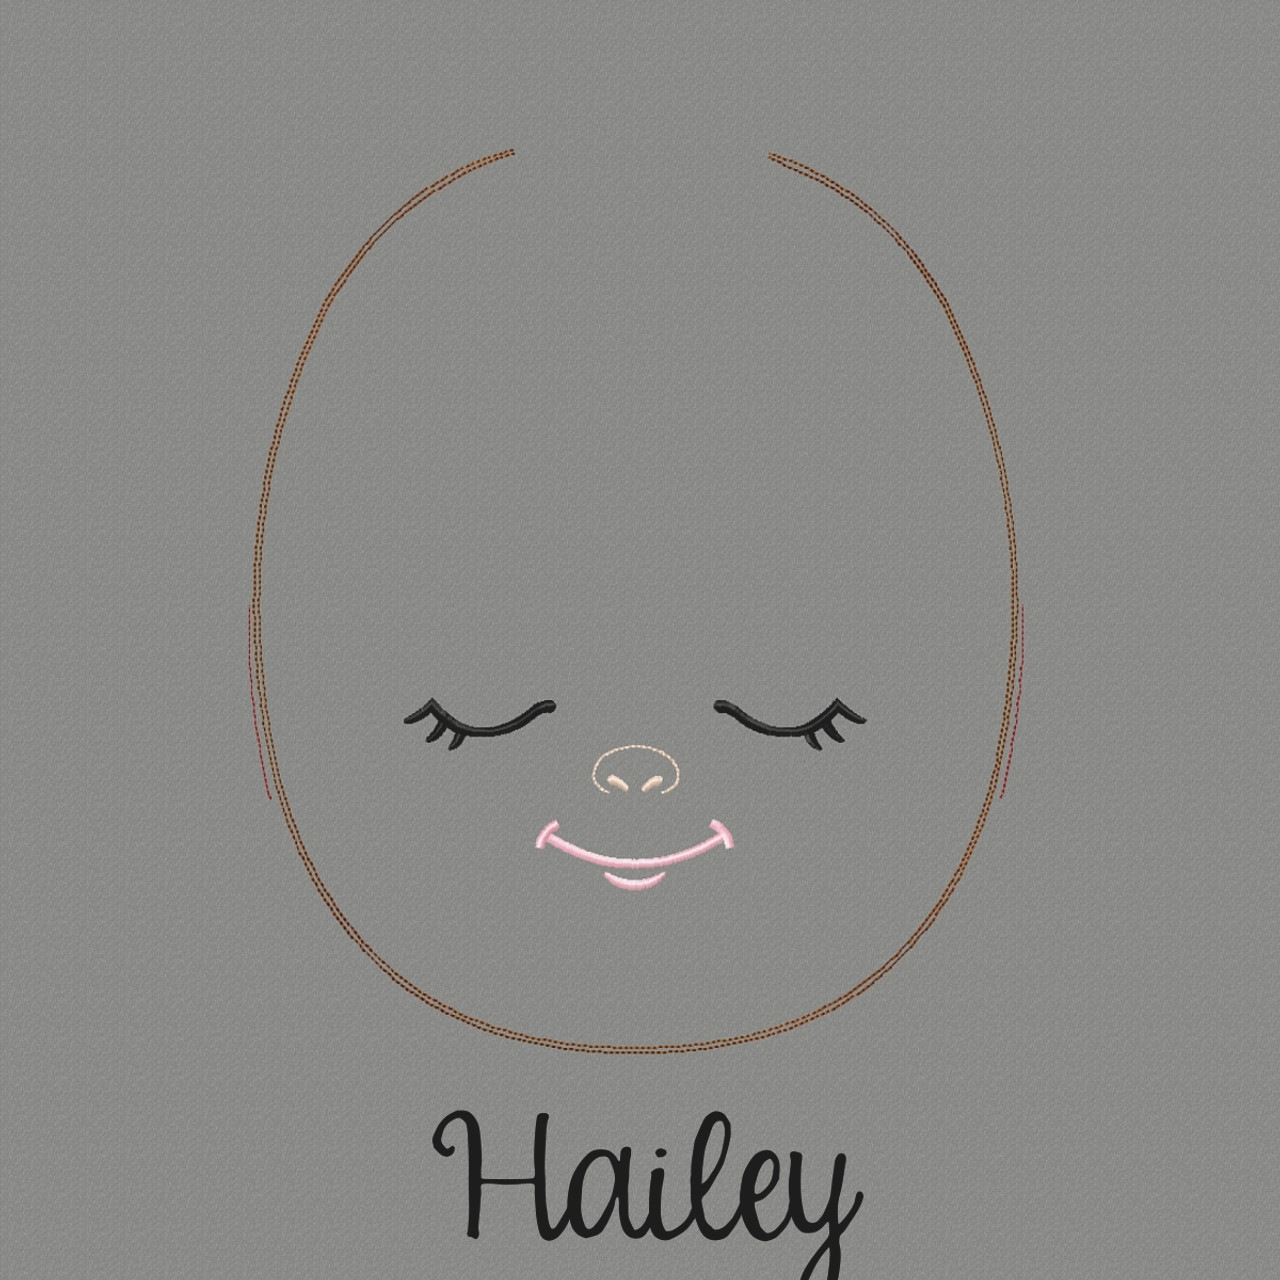 Hailey Doll Faces Addon Embroidery Machine Design